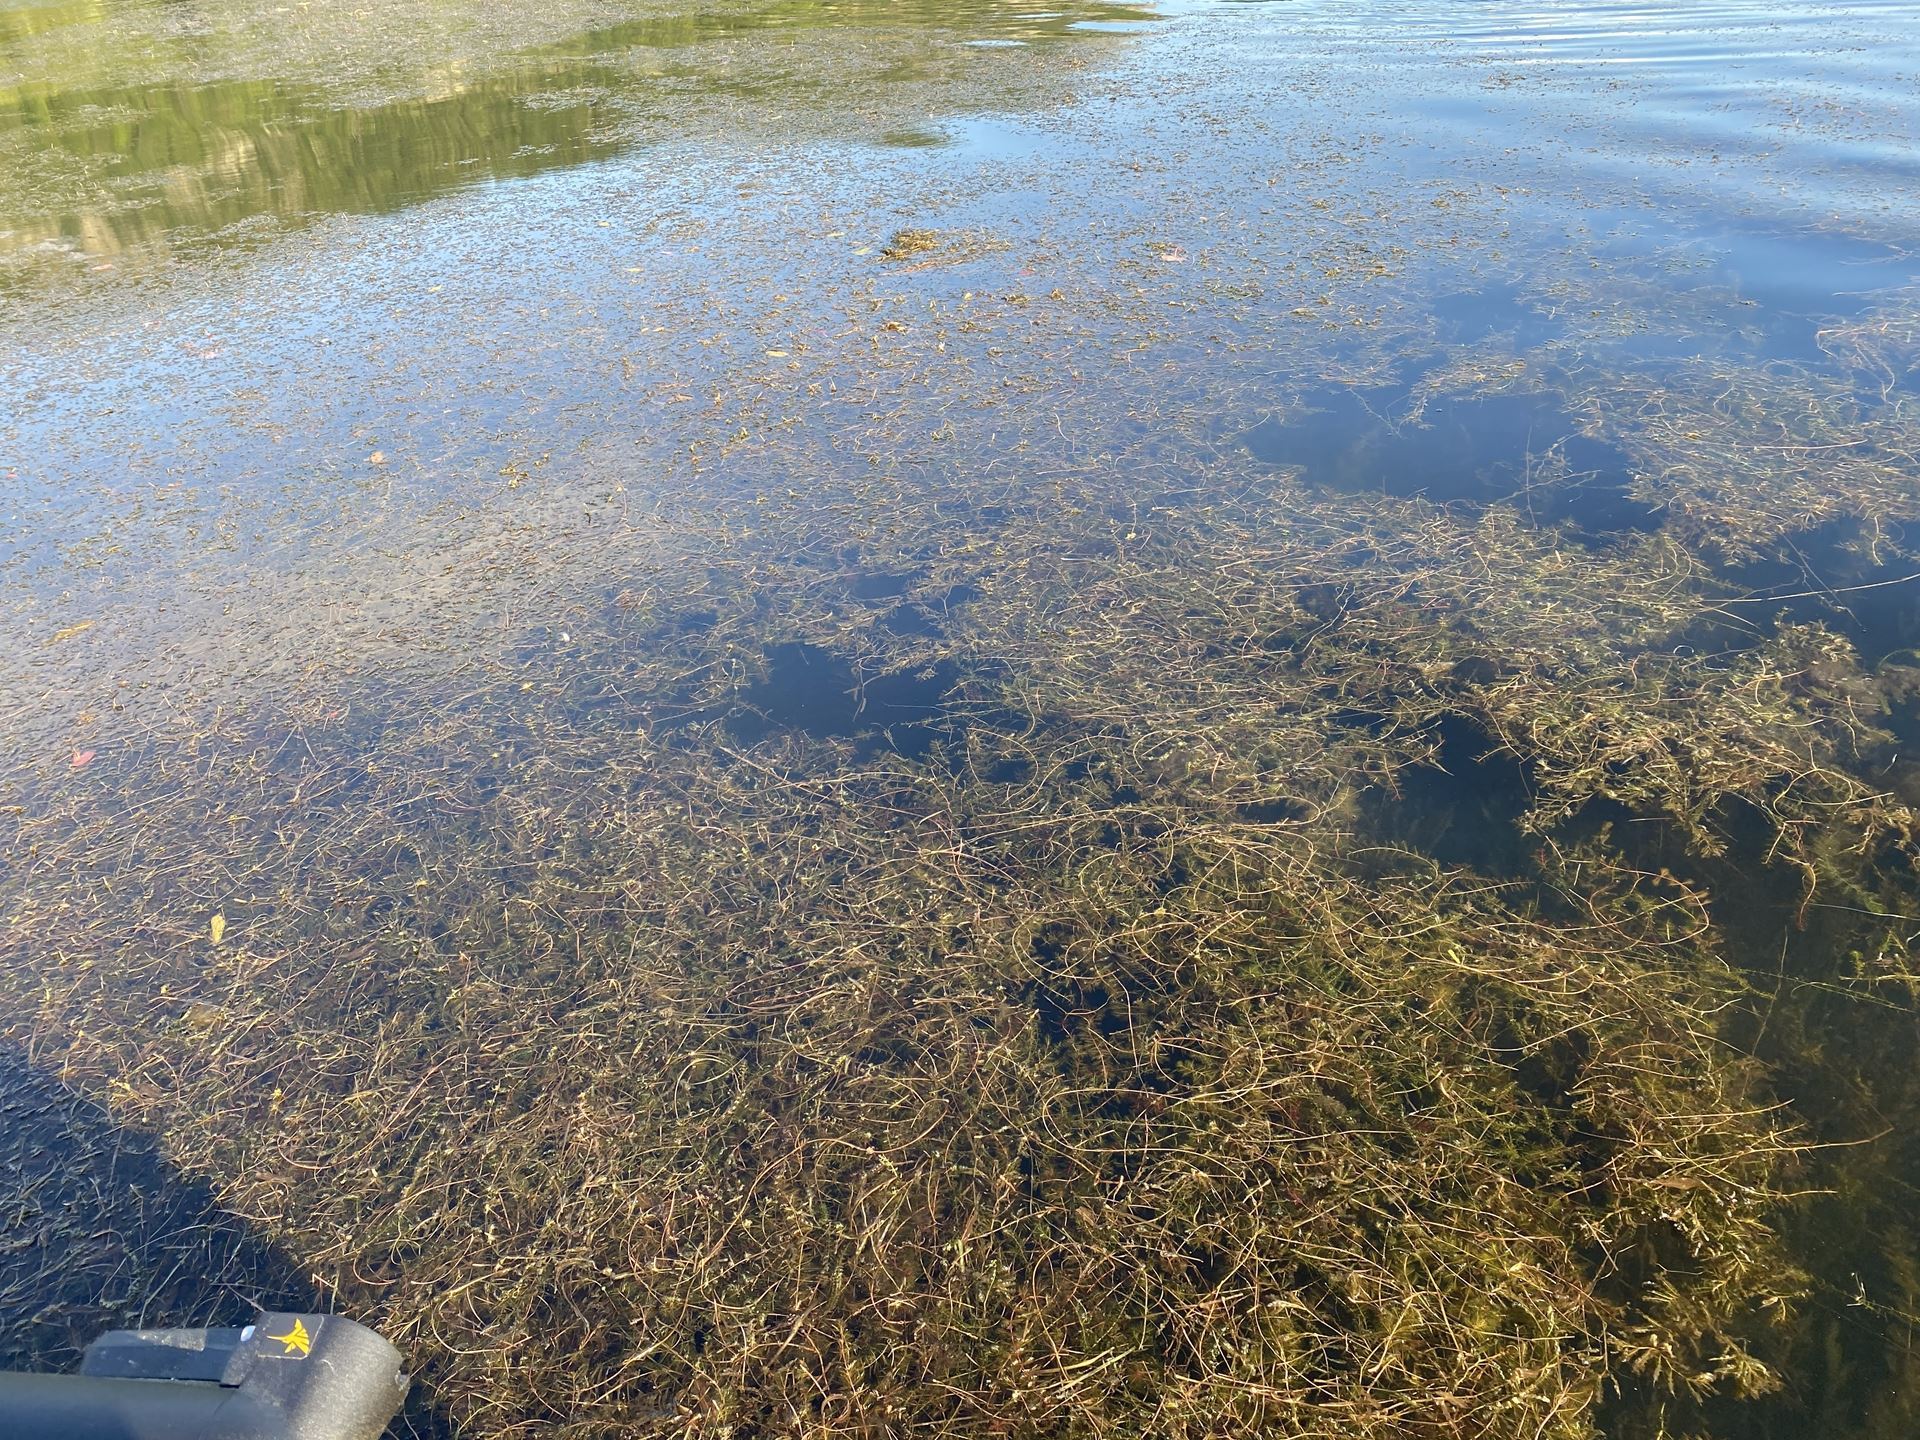 A photo of Little Lake showing dense milfoil growth